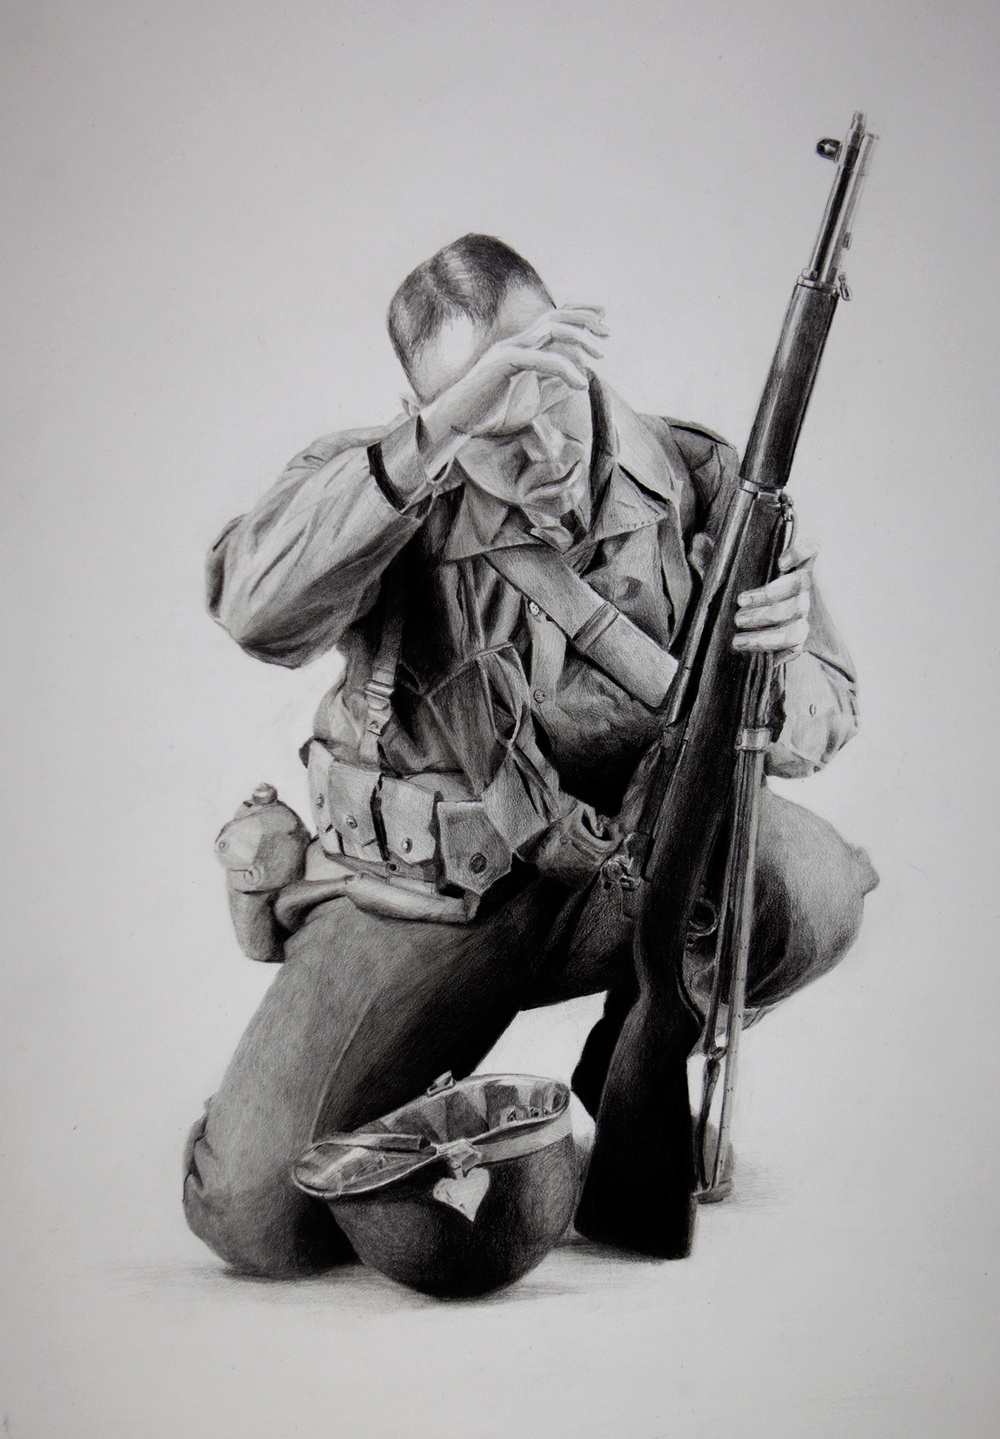 Military Graphic Artist of the Year Runner Up: Soldier Takes a Knee